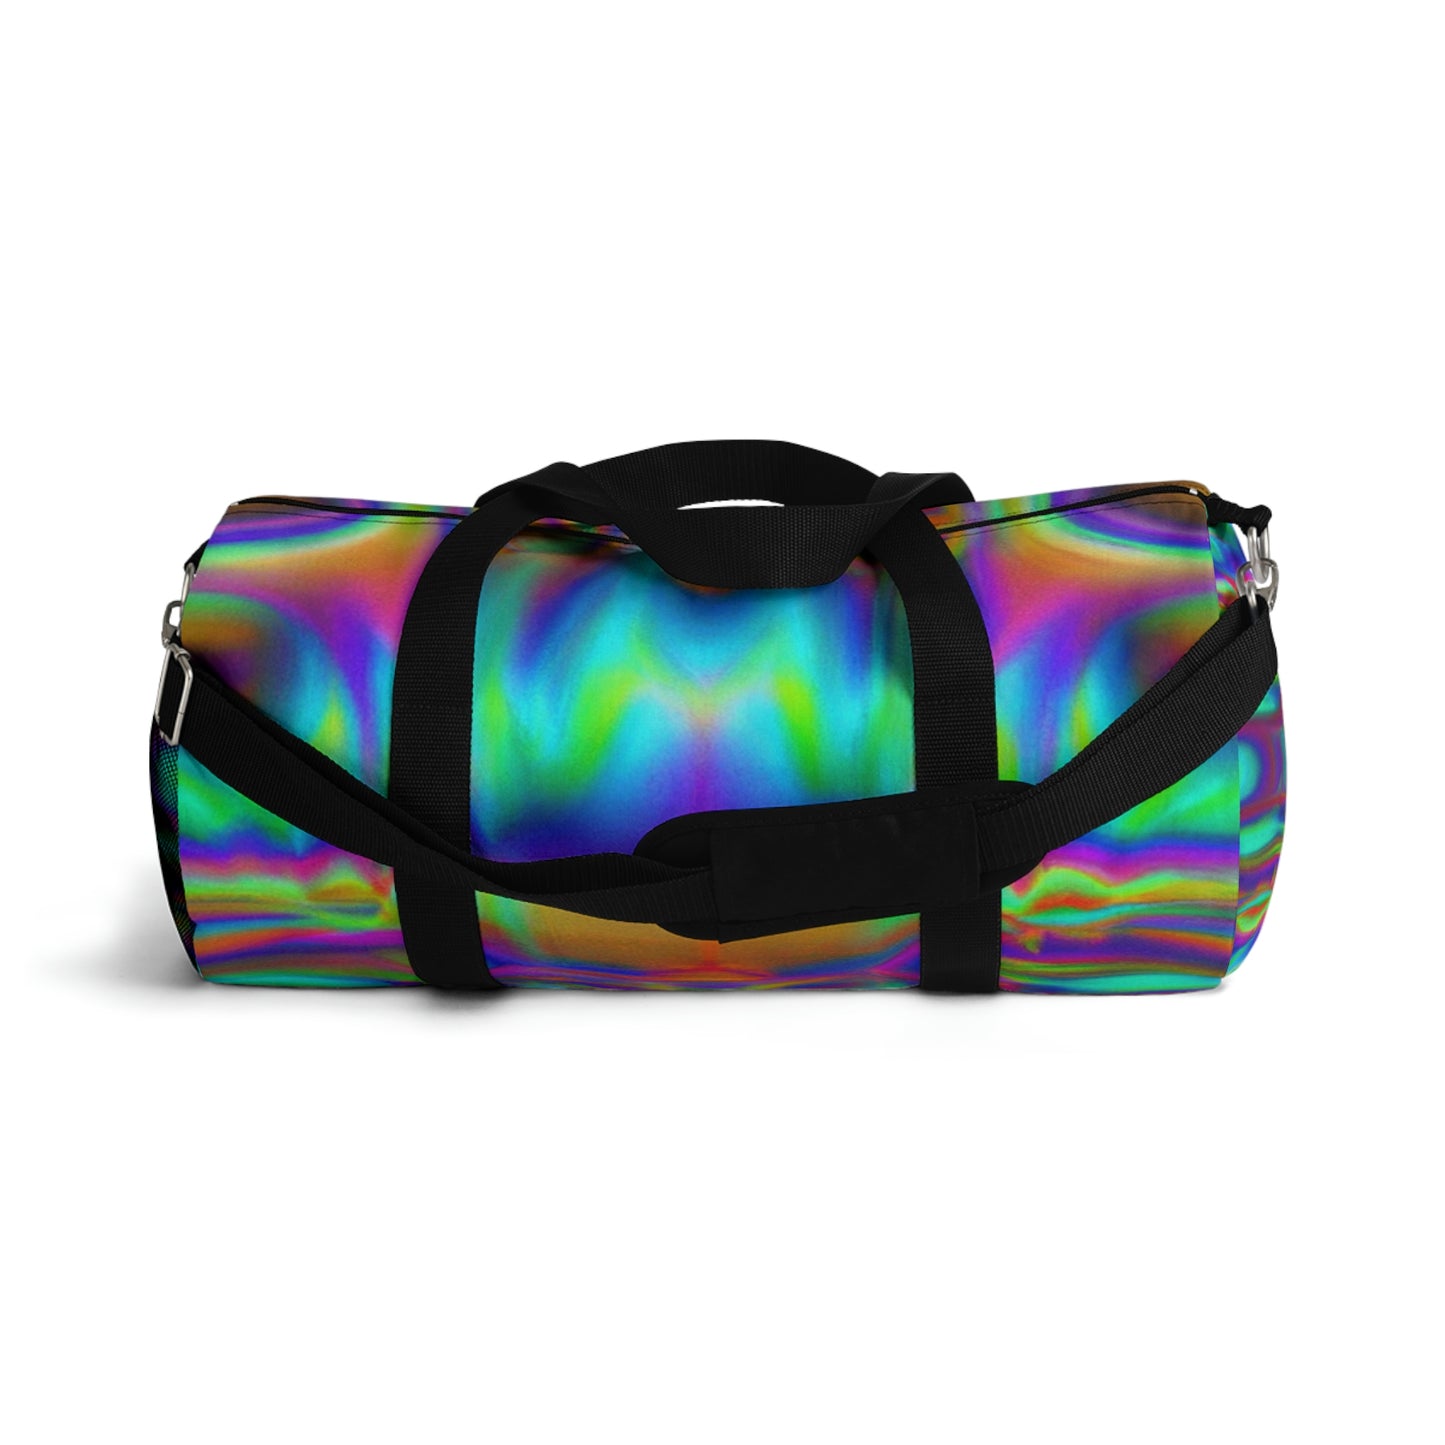 .

Luxacie - Psychedelic Duffel Bag